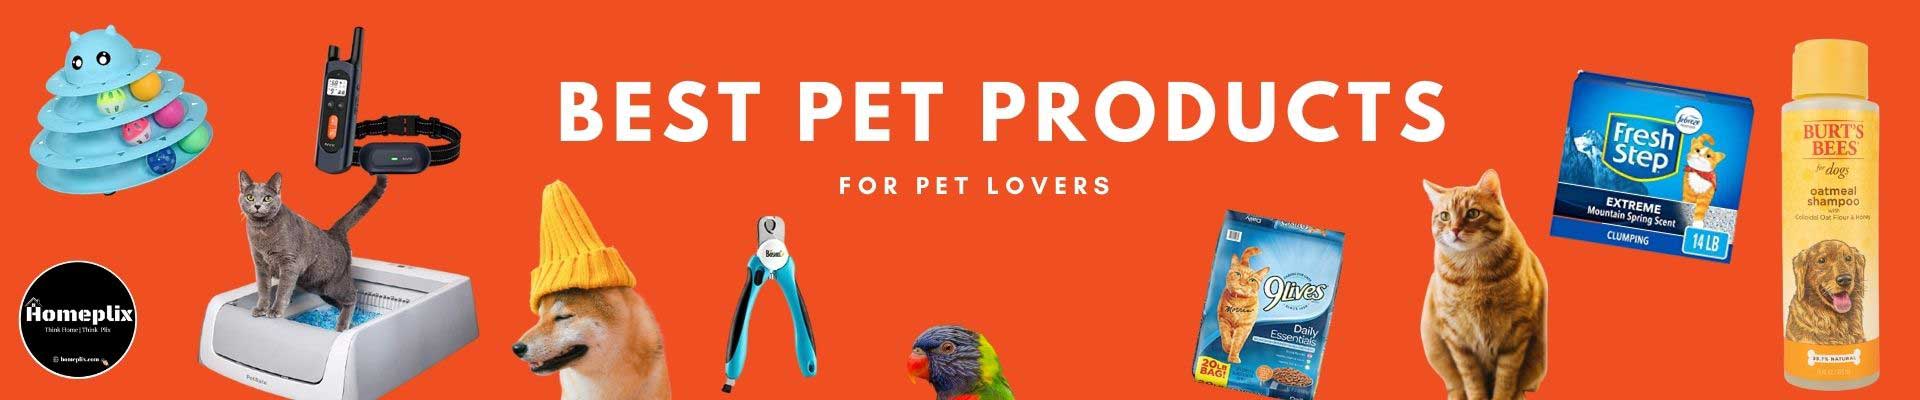 Best-Pet-Products-featured-updated